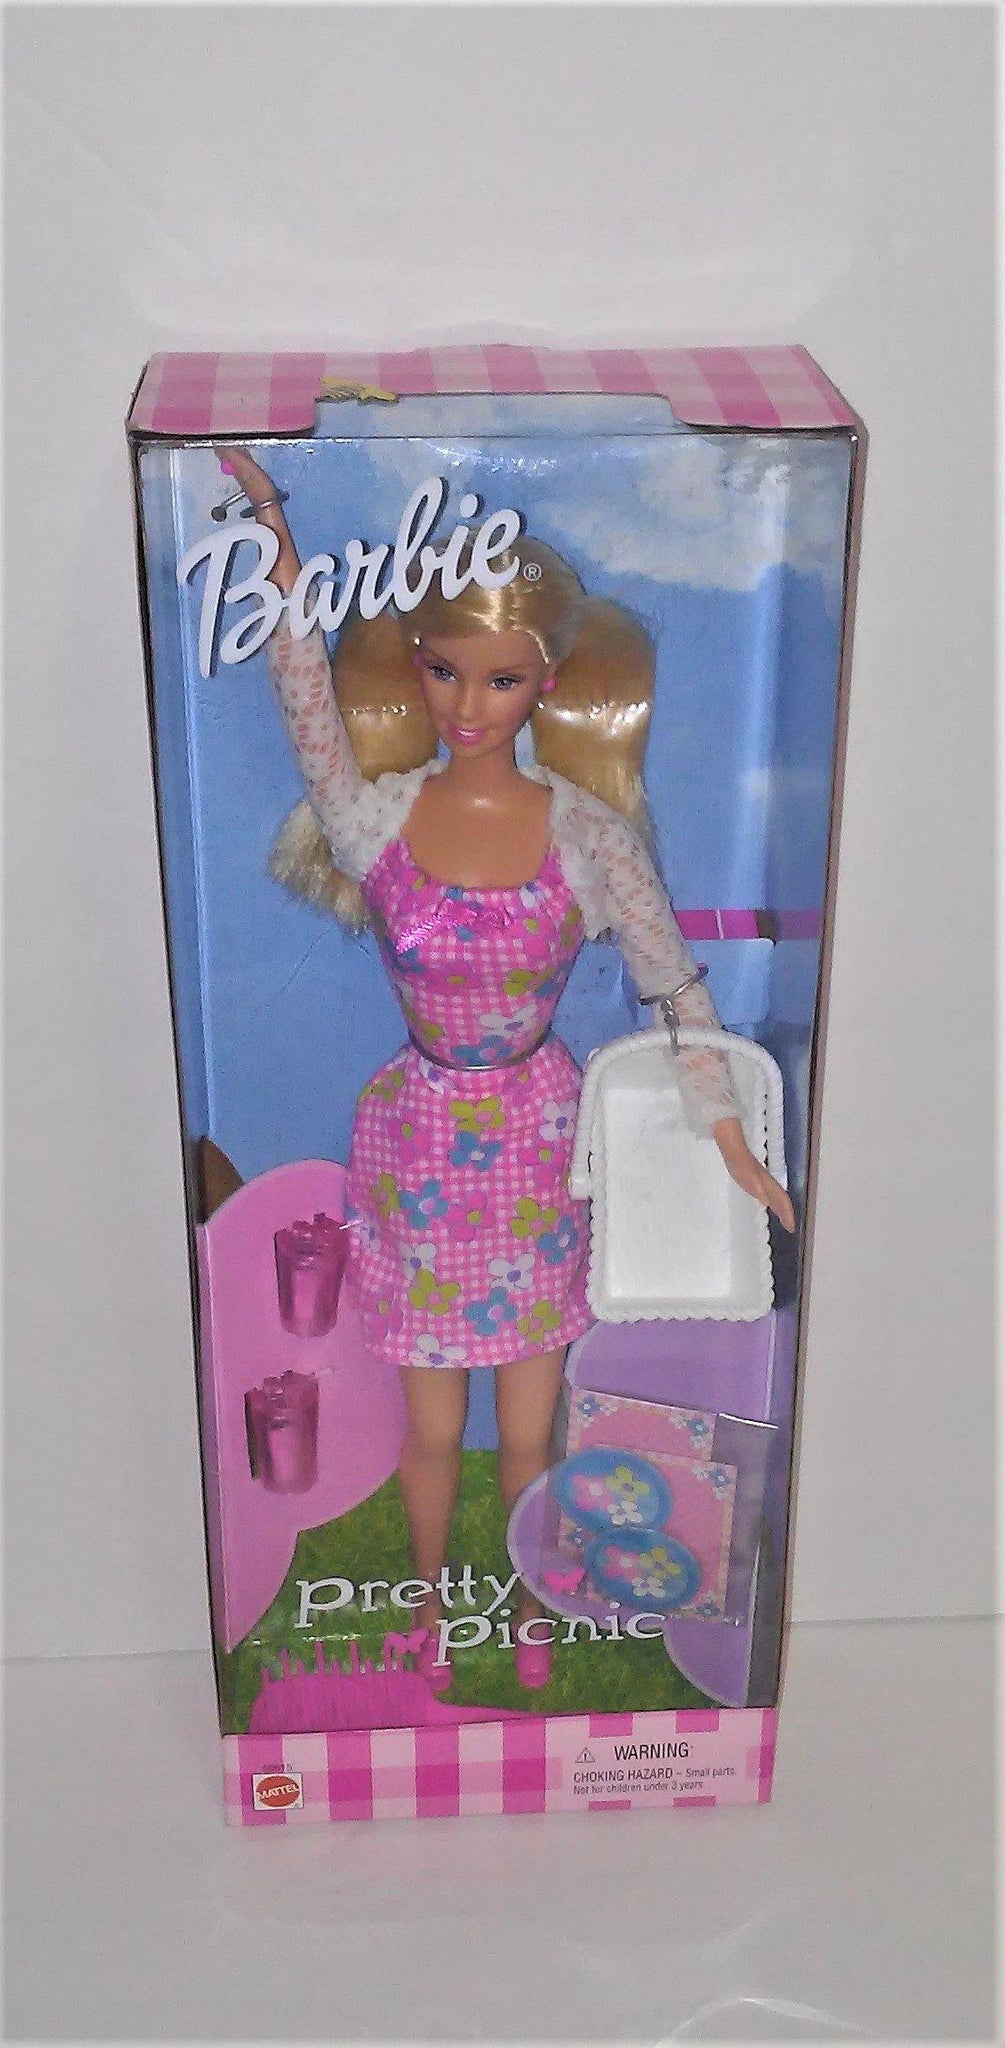 Barbie PRETTY PICNIC Doll Playset from 2000 – Sandee's Memories &  Collectibles